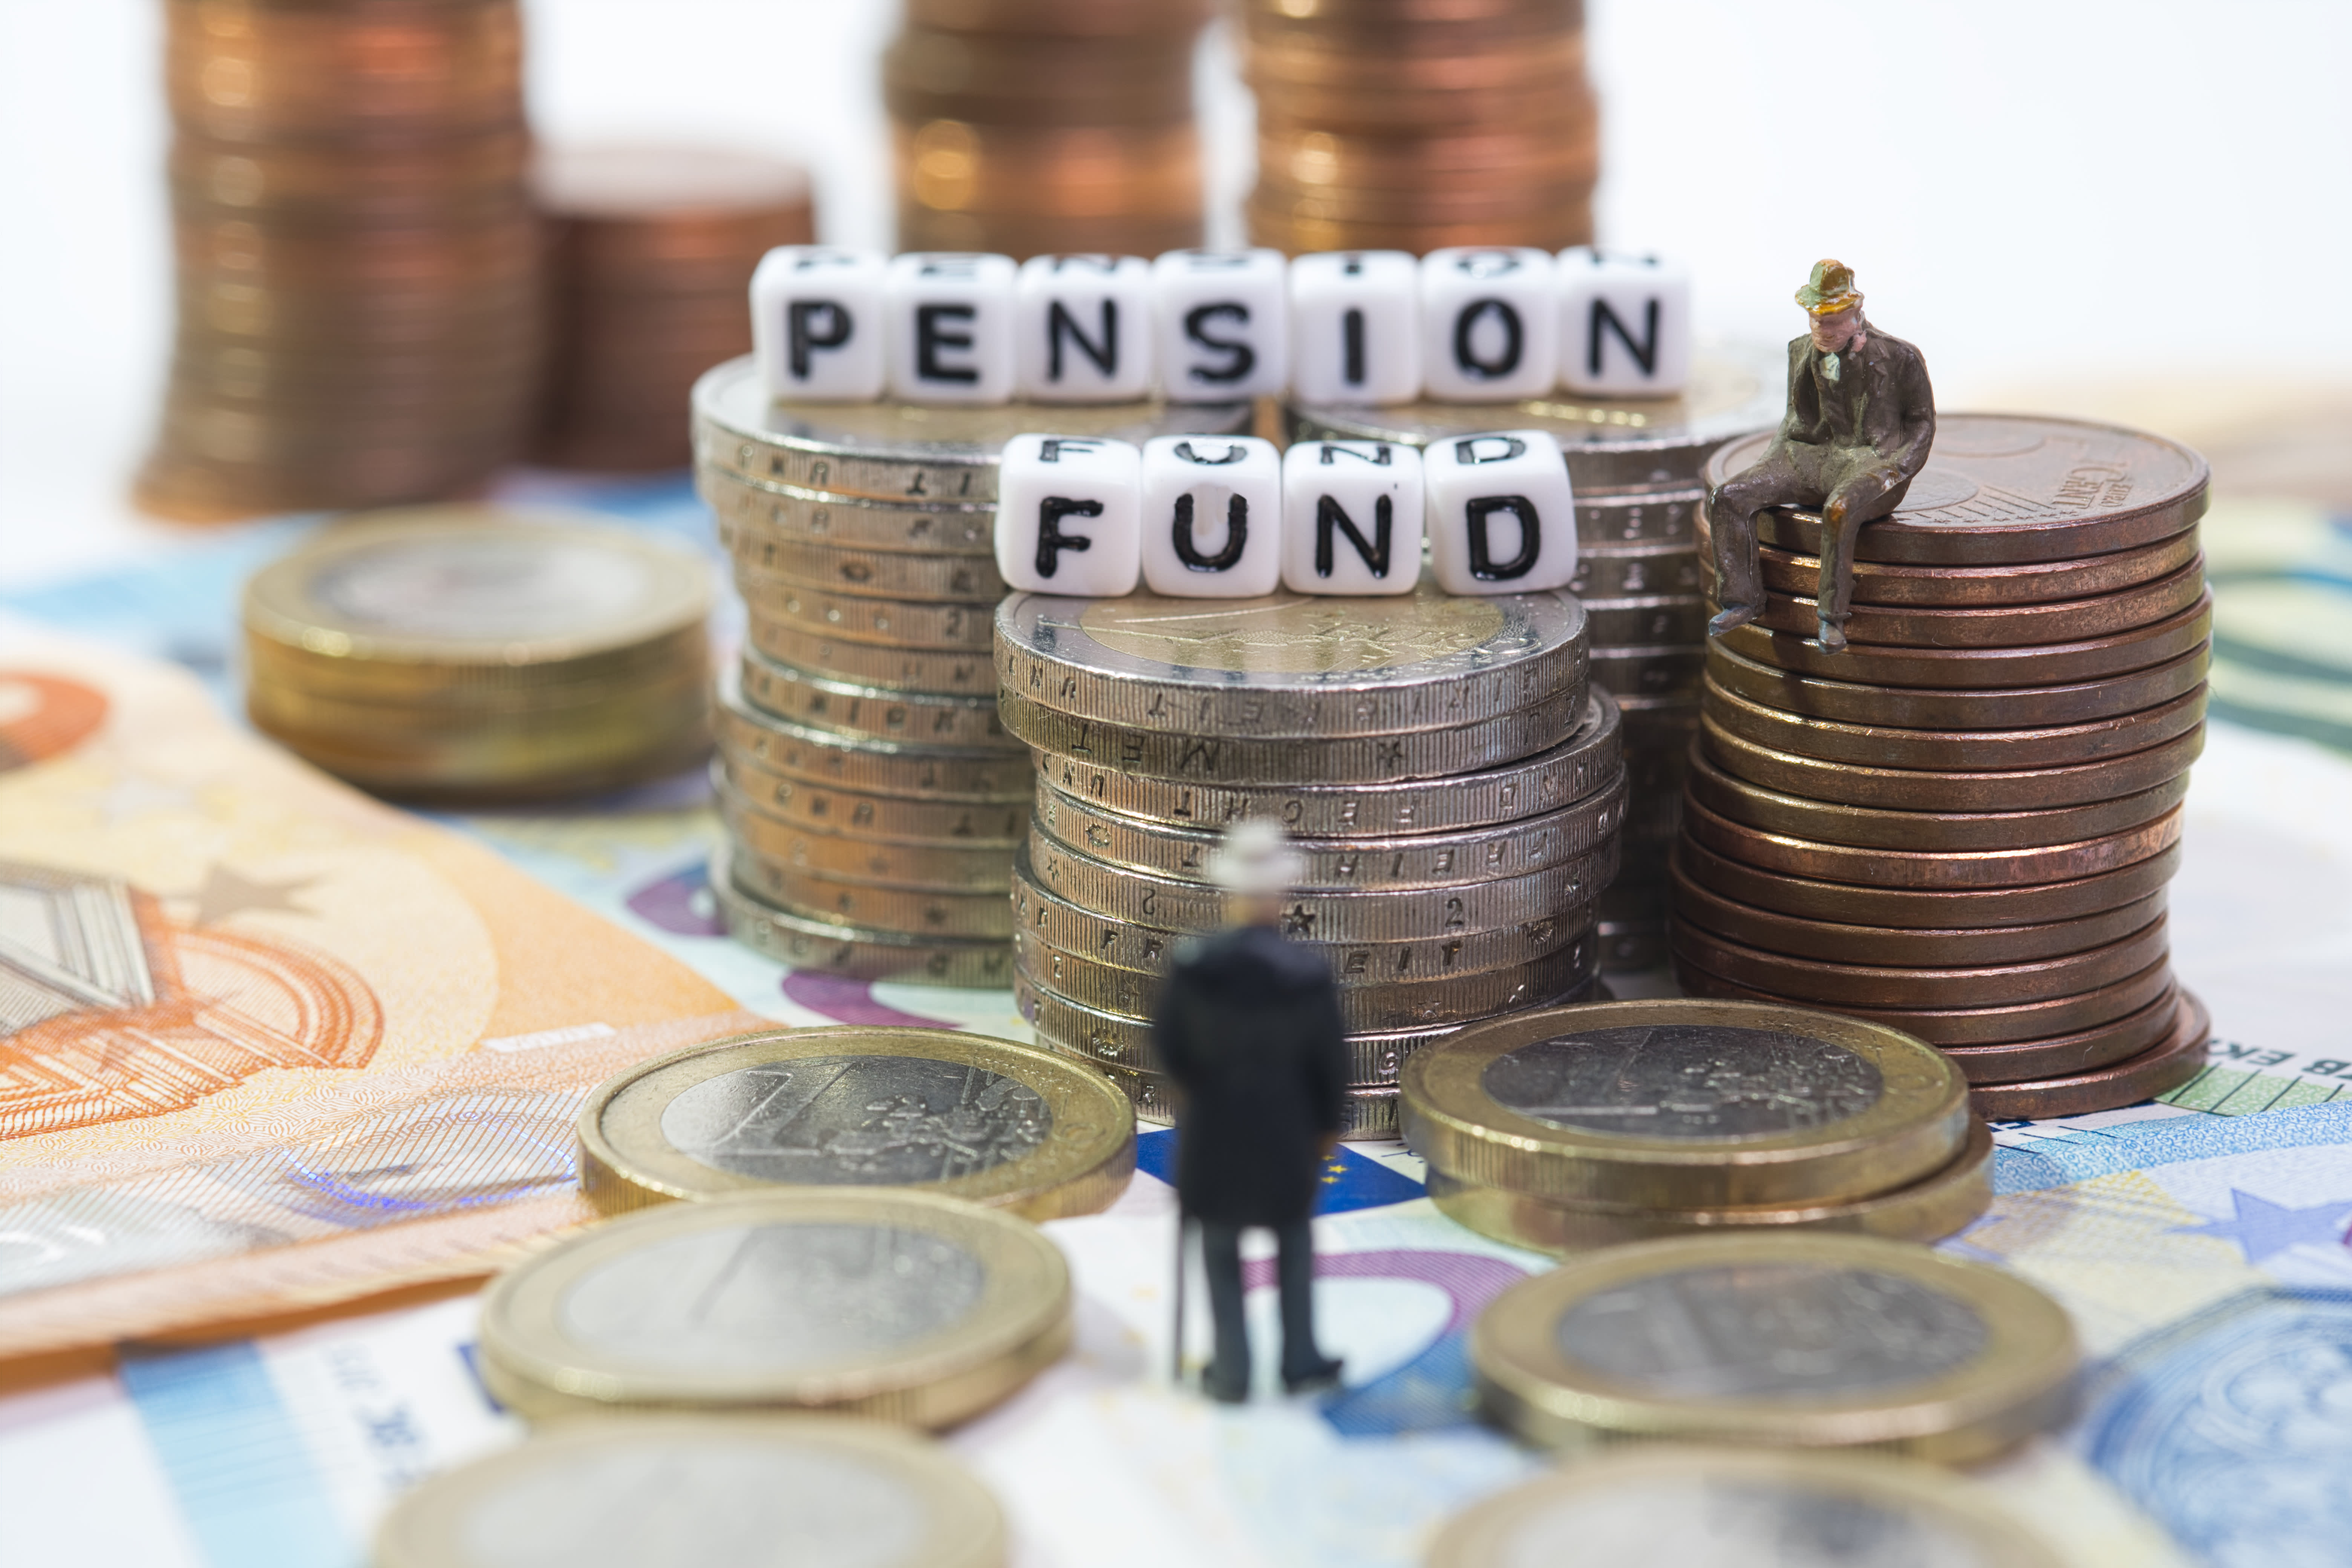 Pension transfer utopia possible if industry can unify standards